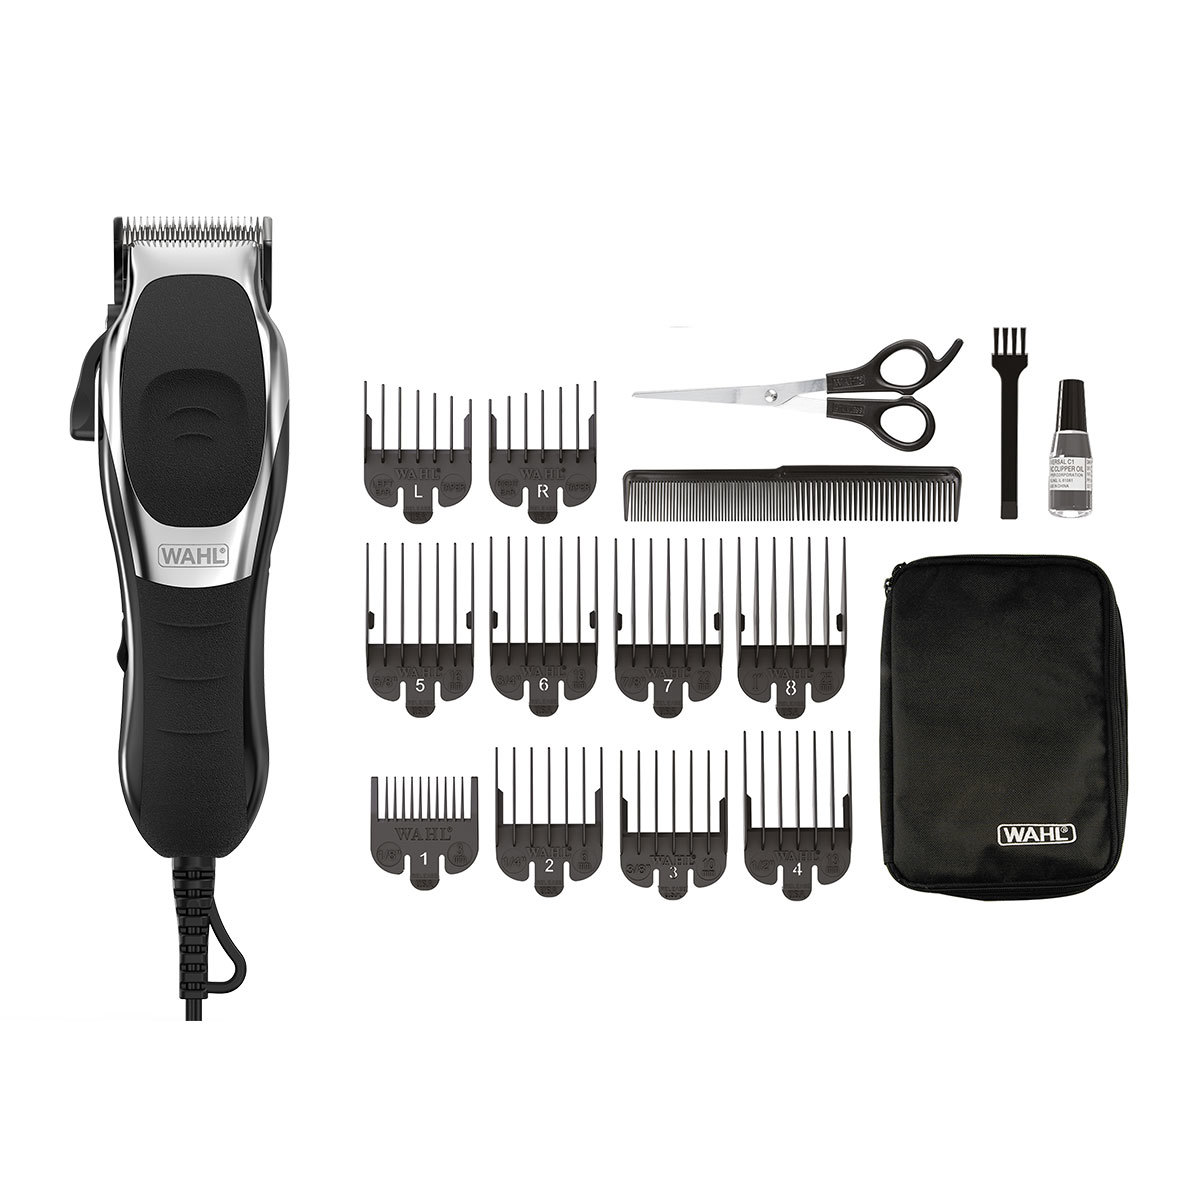 costco dog grooming clippers